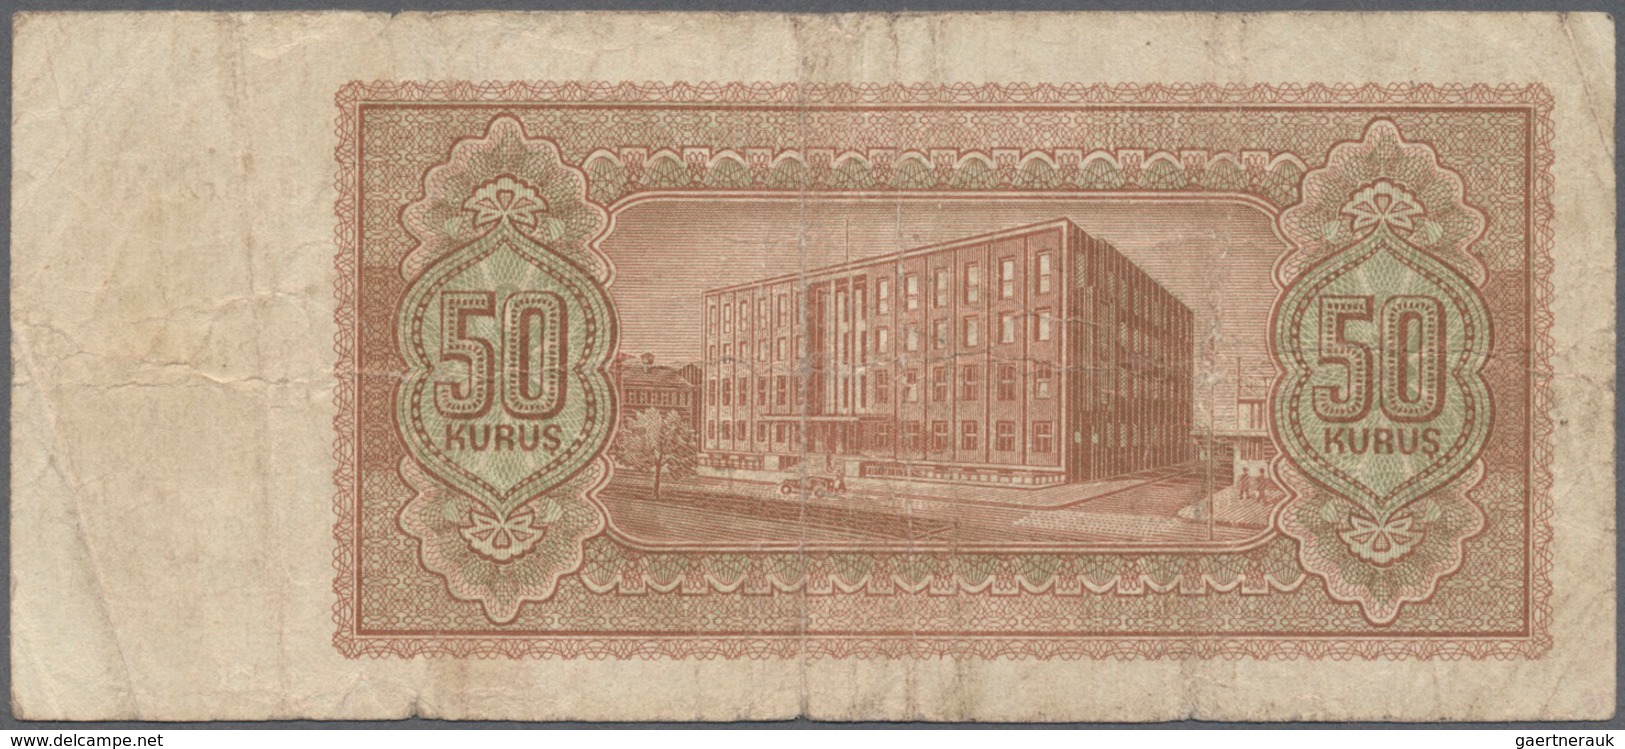 02528 Turkey / Türkei: 50 Kurus ND(1944) P. 134, Used With Several Folds And Staining In Paper, No Holes O - Turkije